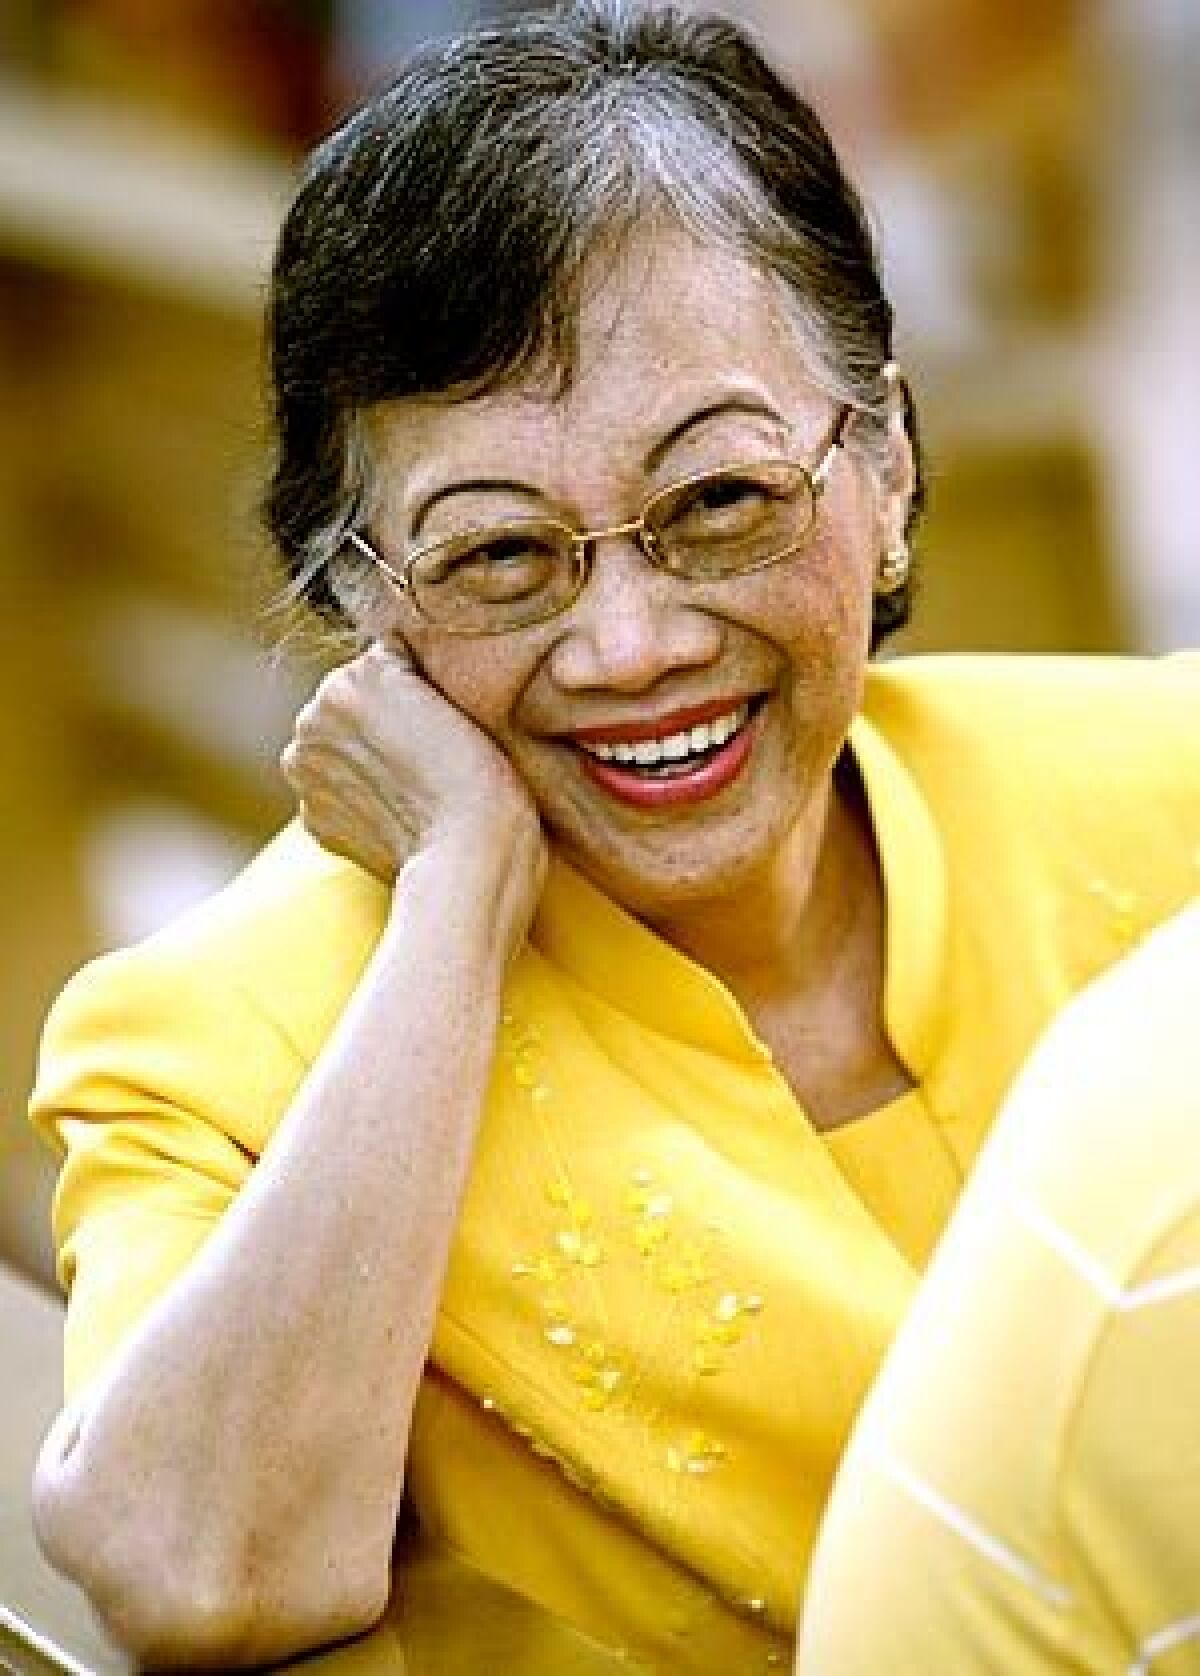 Aquino, in her signature yellow, attends Mass in 2008 to commemorate the 25th anniversary of her husband's slaying, which sparked a nonviolent uprising that toppled dictator Ferdinand Marcos and brought her to power.